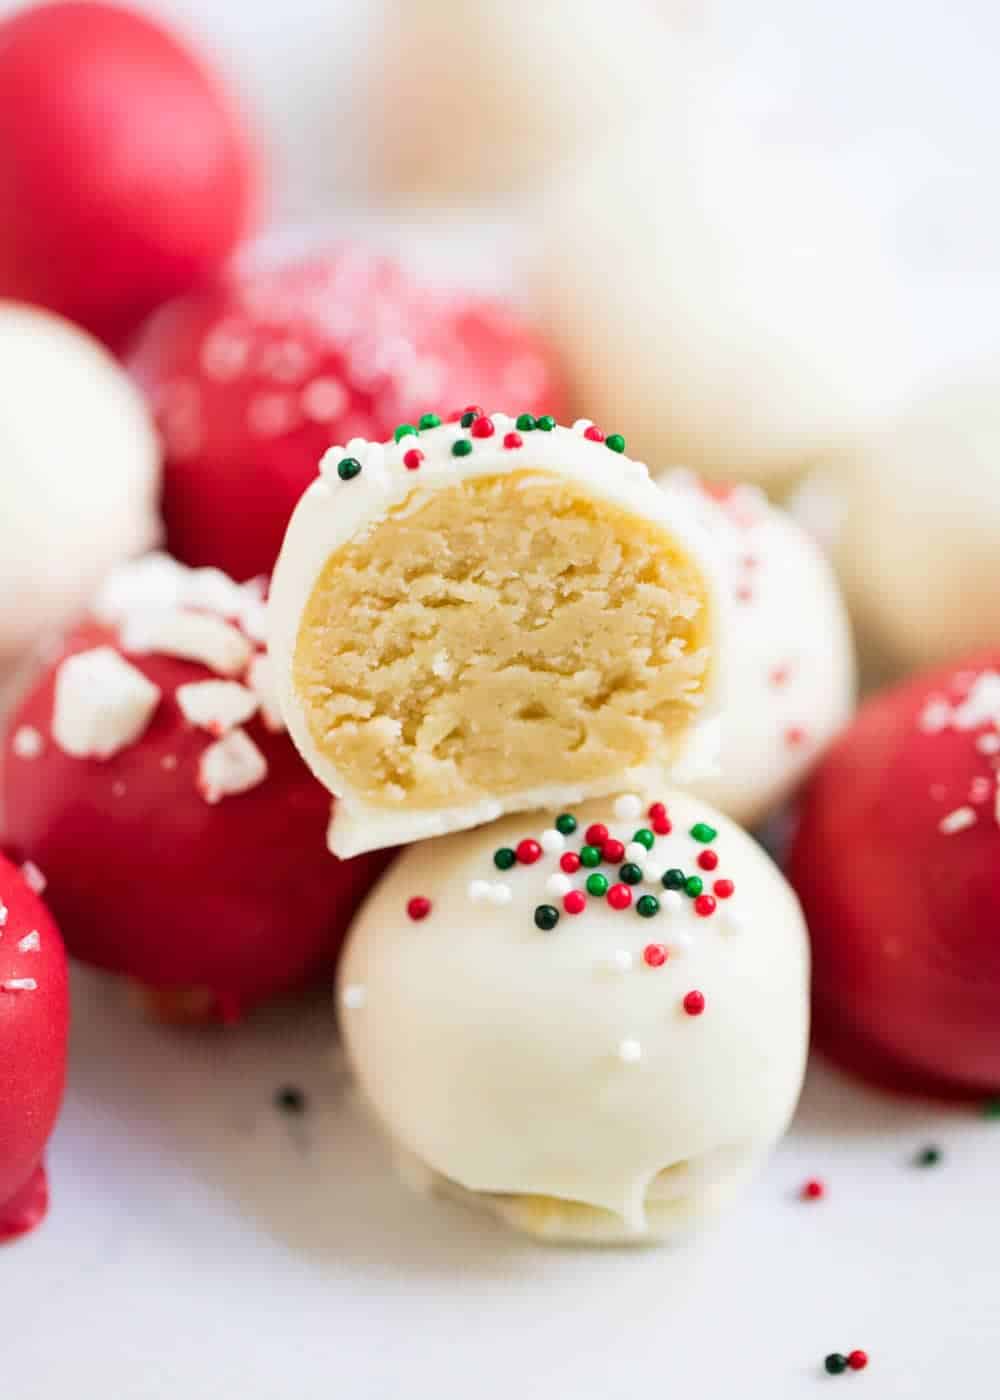 A close up of a half eaten Christmas sugar cookie truffle.